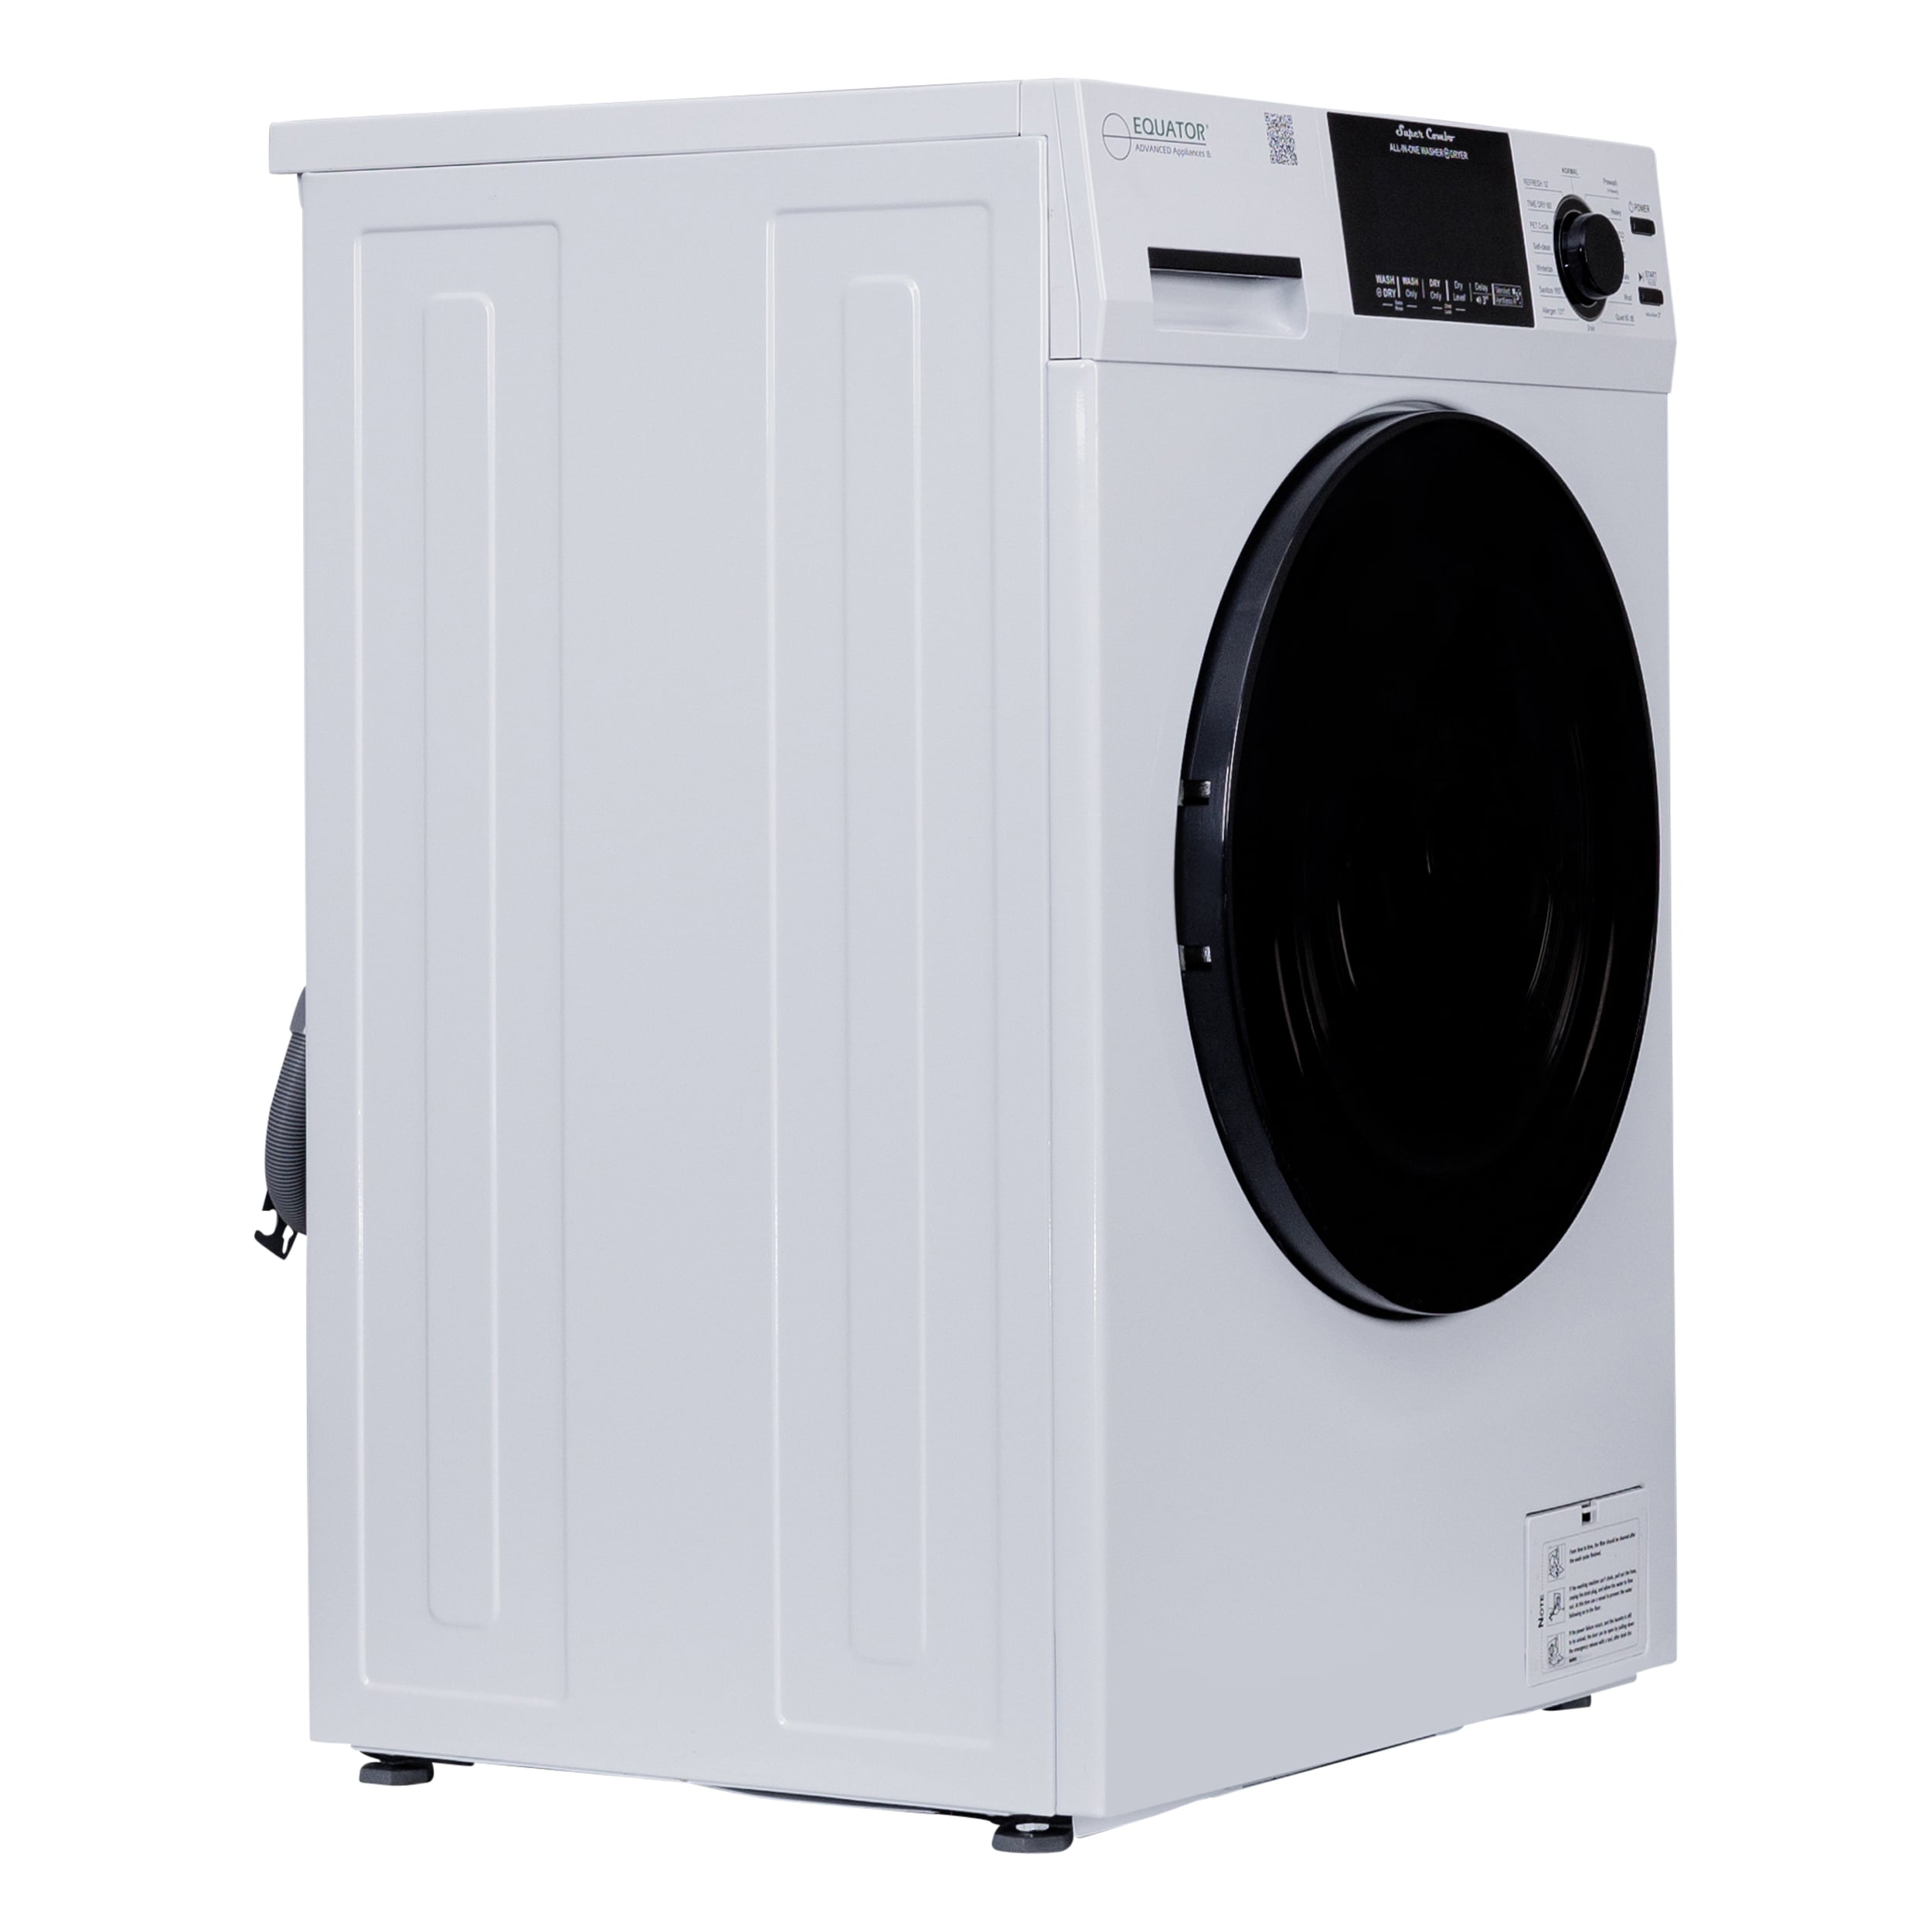 Equator White Compact Combo Washer Dryer with Pedestal Storage Drawer